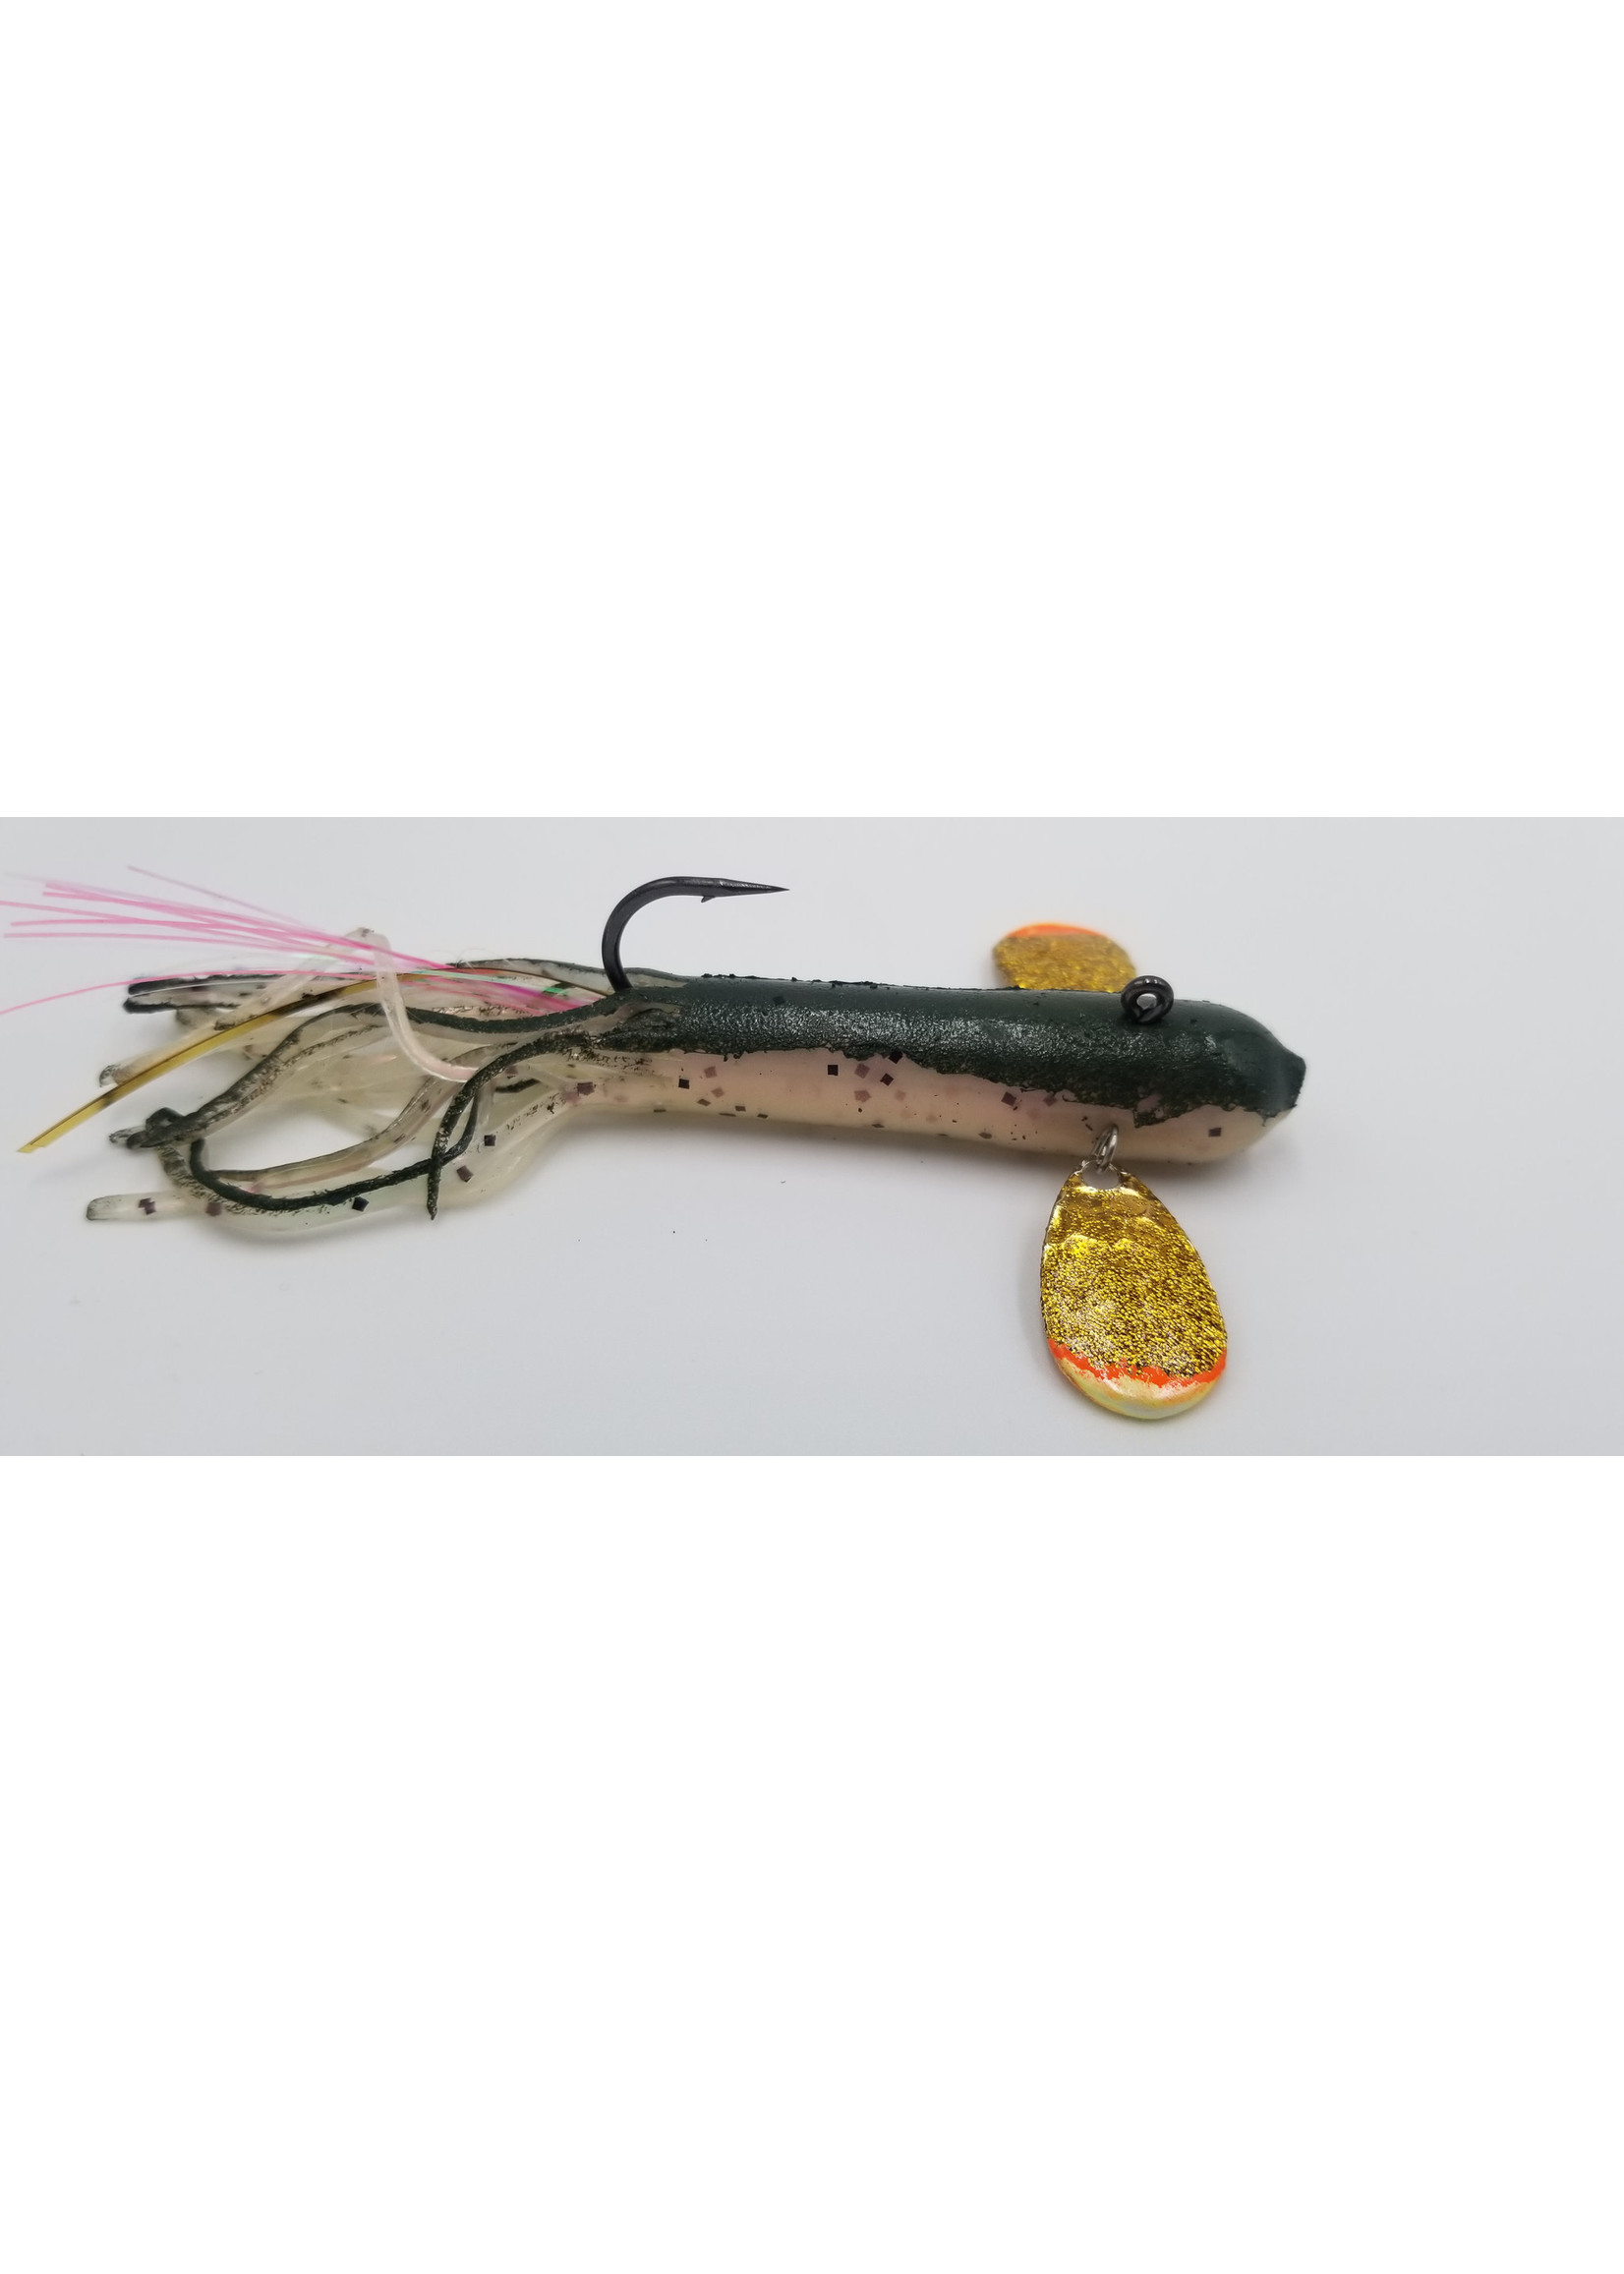 Columbia River Tackle Columbia River Sculpin Tube Rainbow Trout 3.5" US